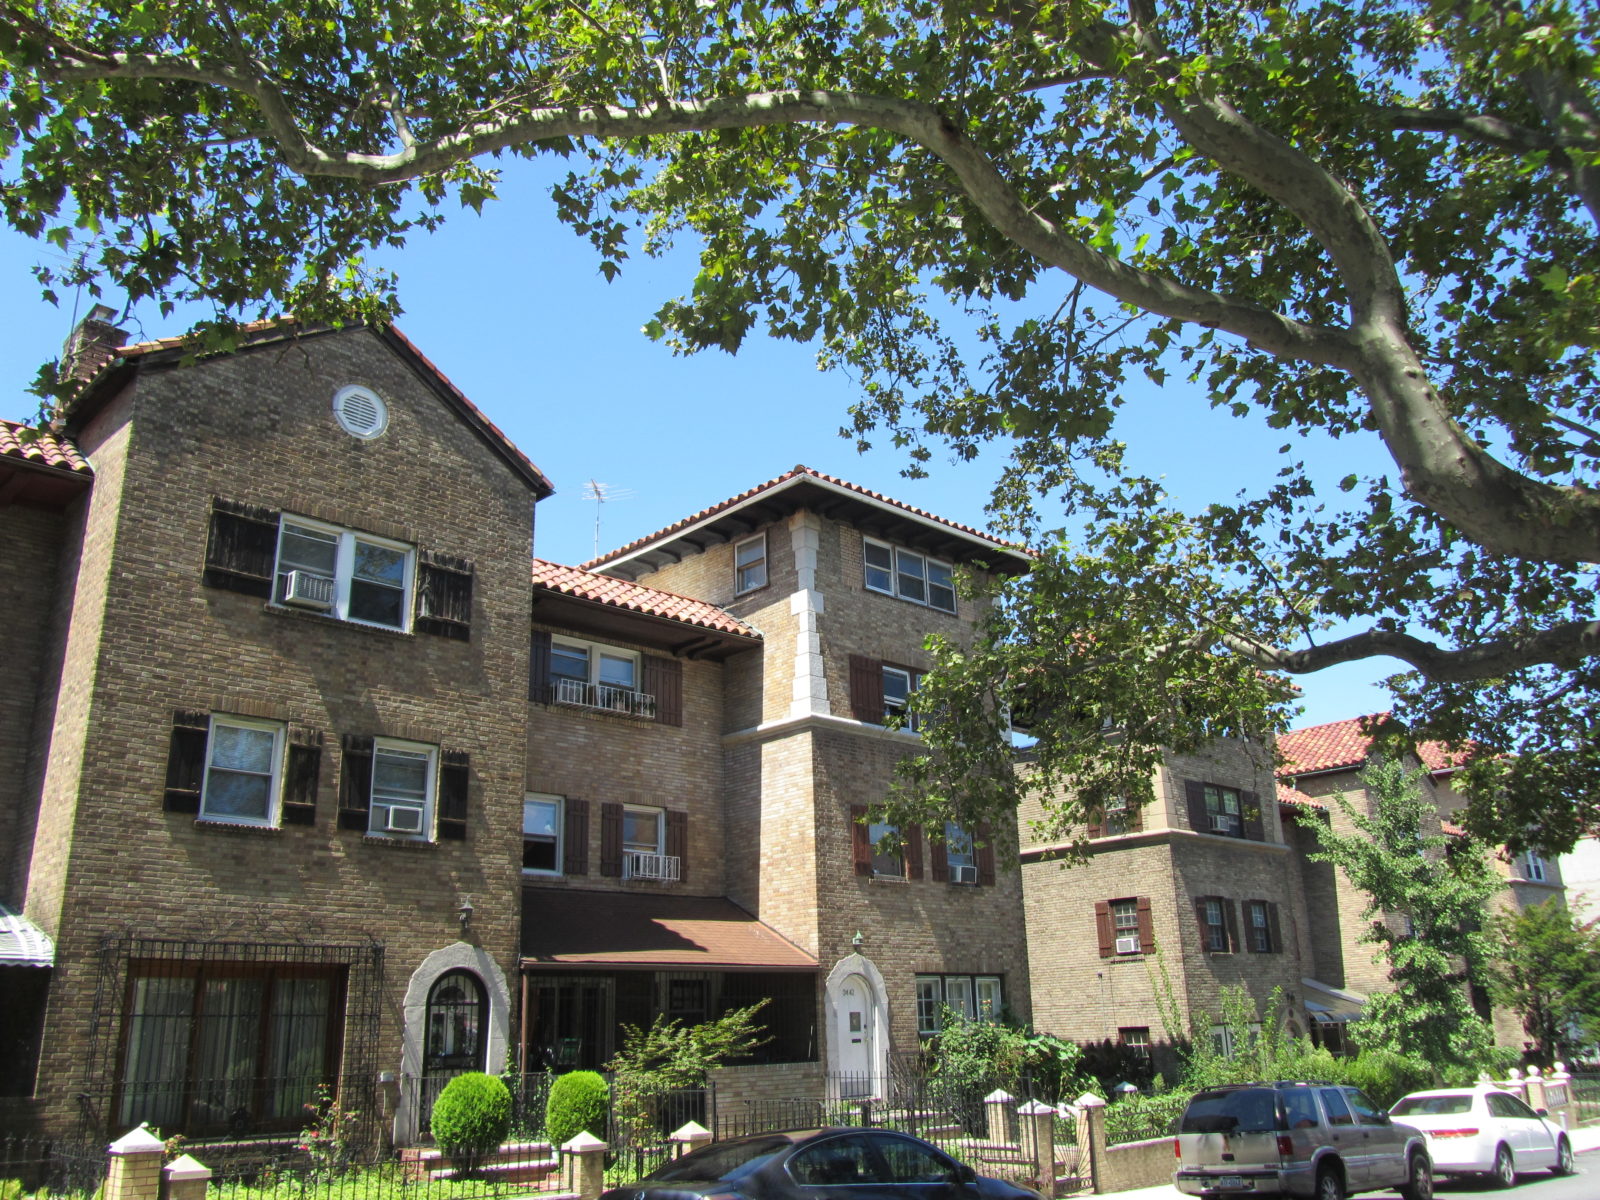 SPANISH TOWER HOMES Historic Districts Council's Six to